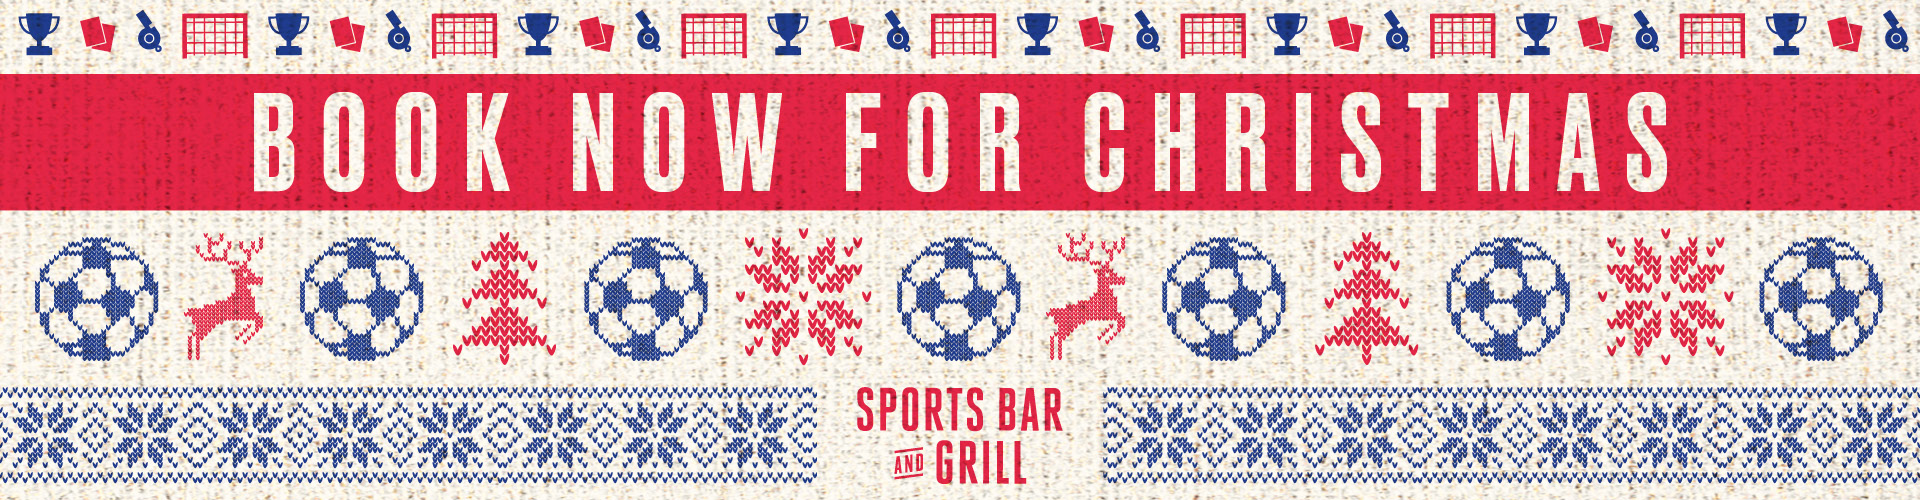 Book Now For Christmas - Sports Bar and Grill